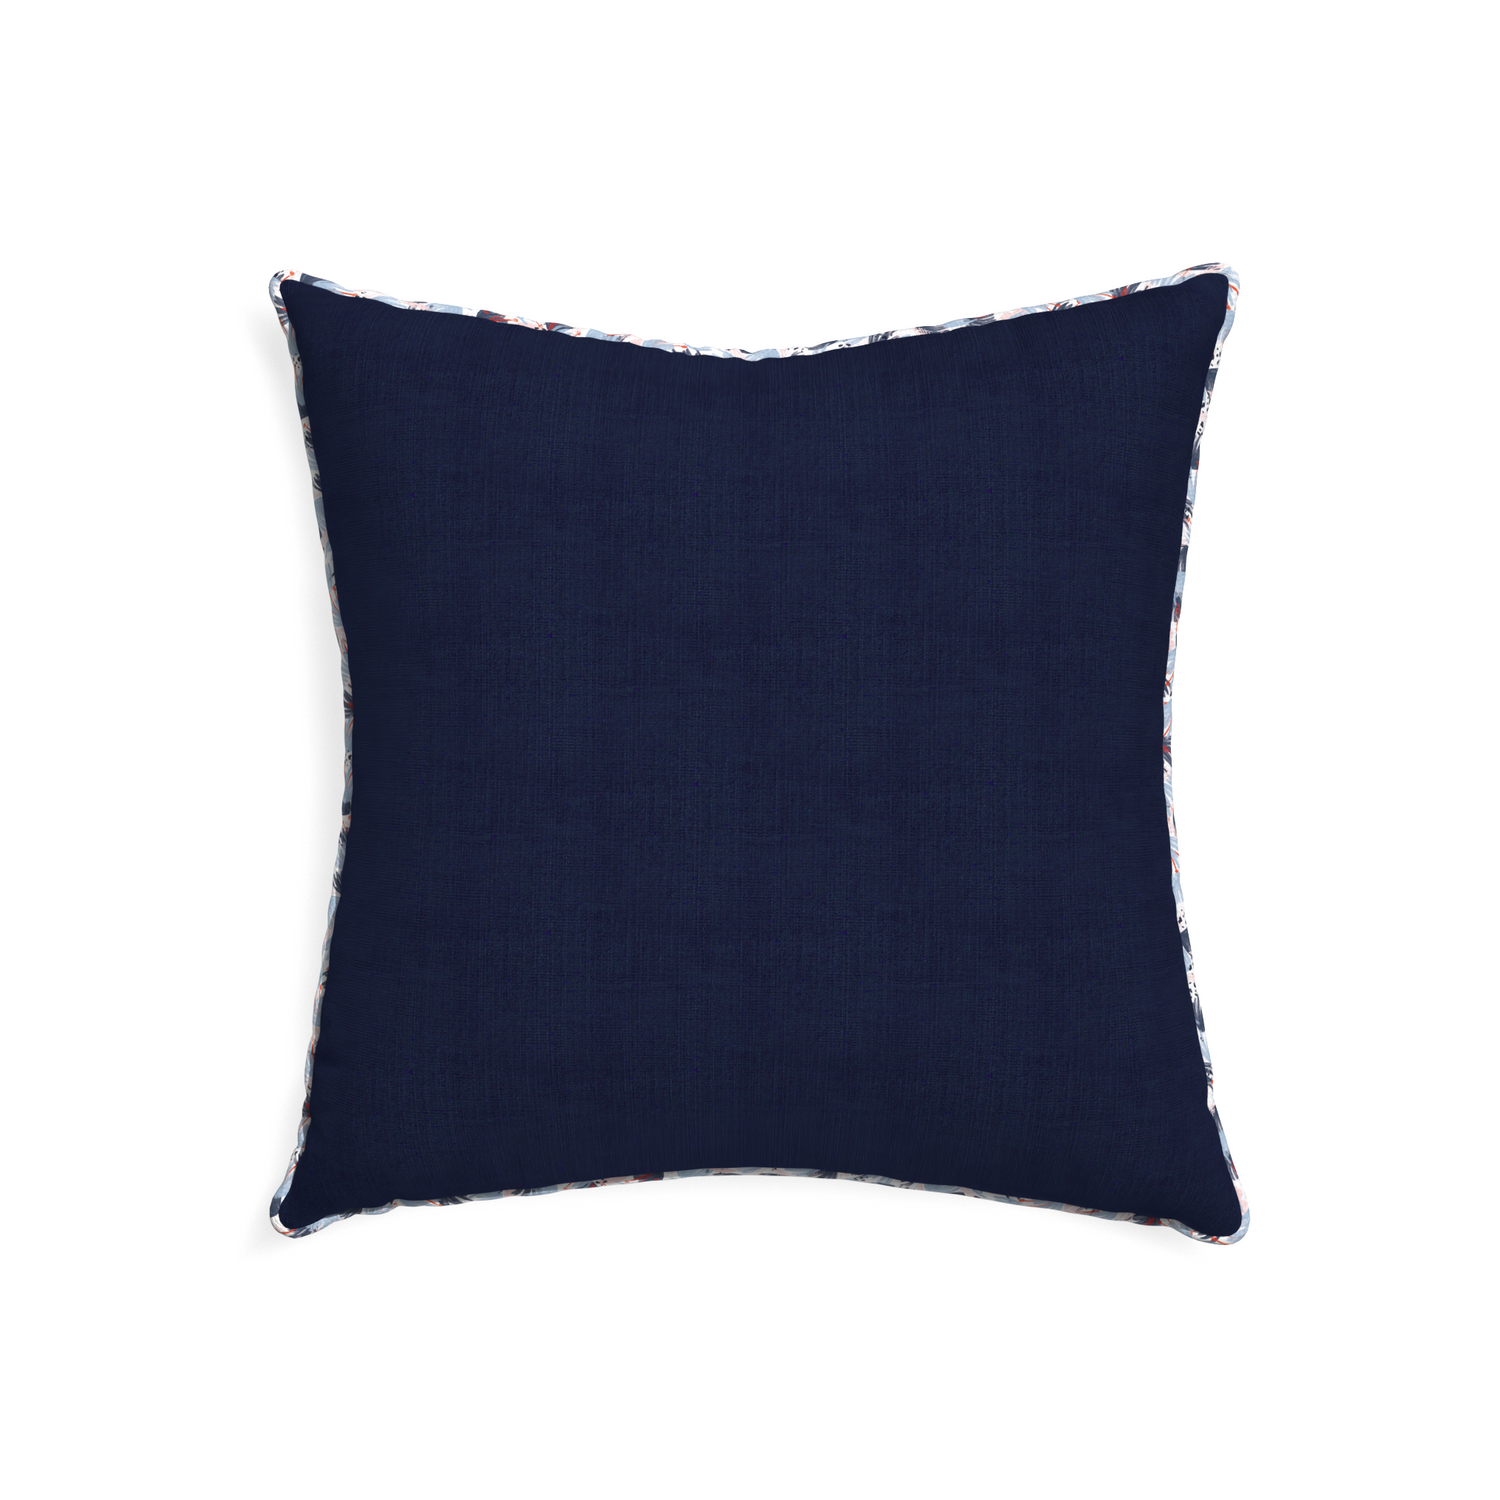 22-square midnight custom navy bluepillow with e piping on white background